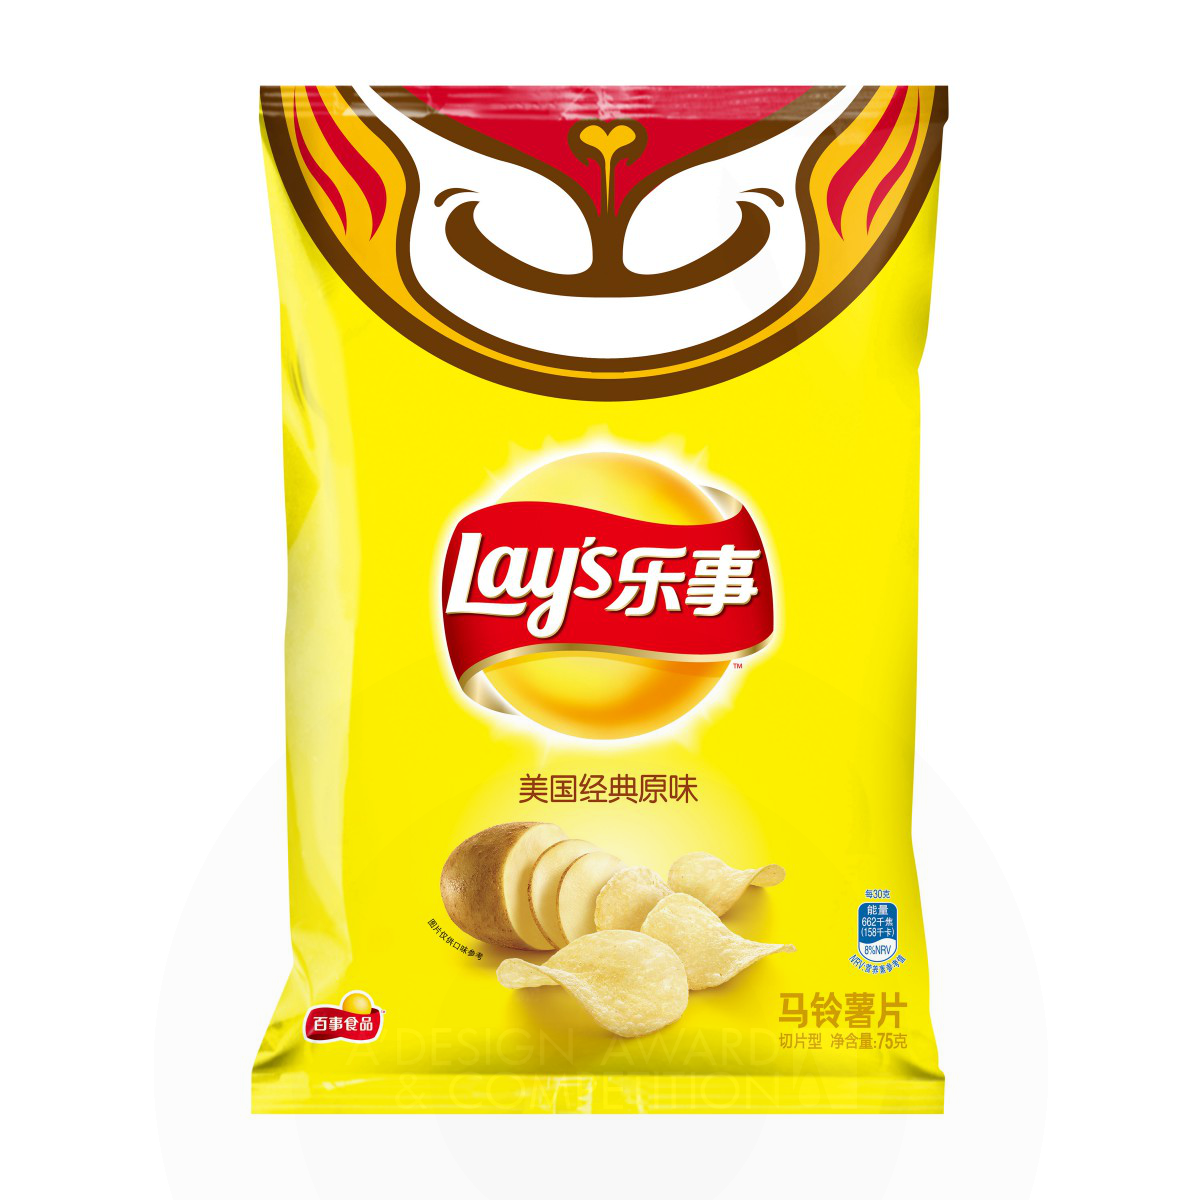 Lay’s Year of the Monkey Ltd Collection Snack Bag by PepsiCo Design & Innovation